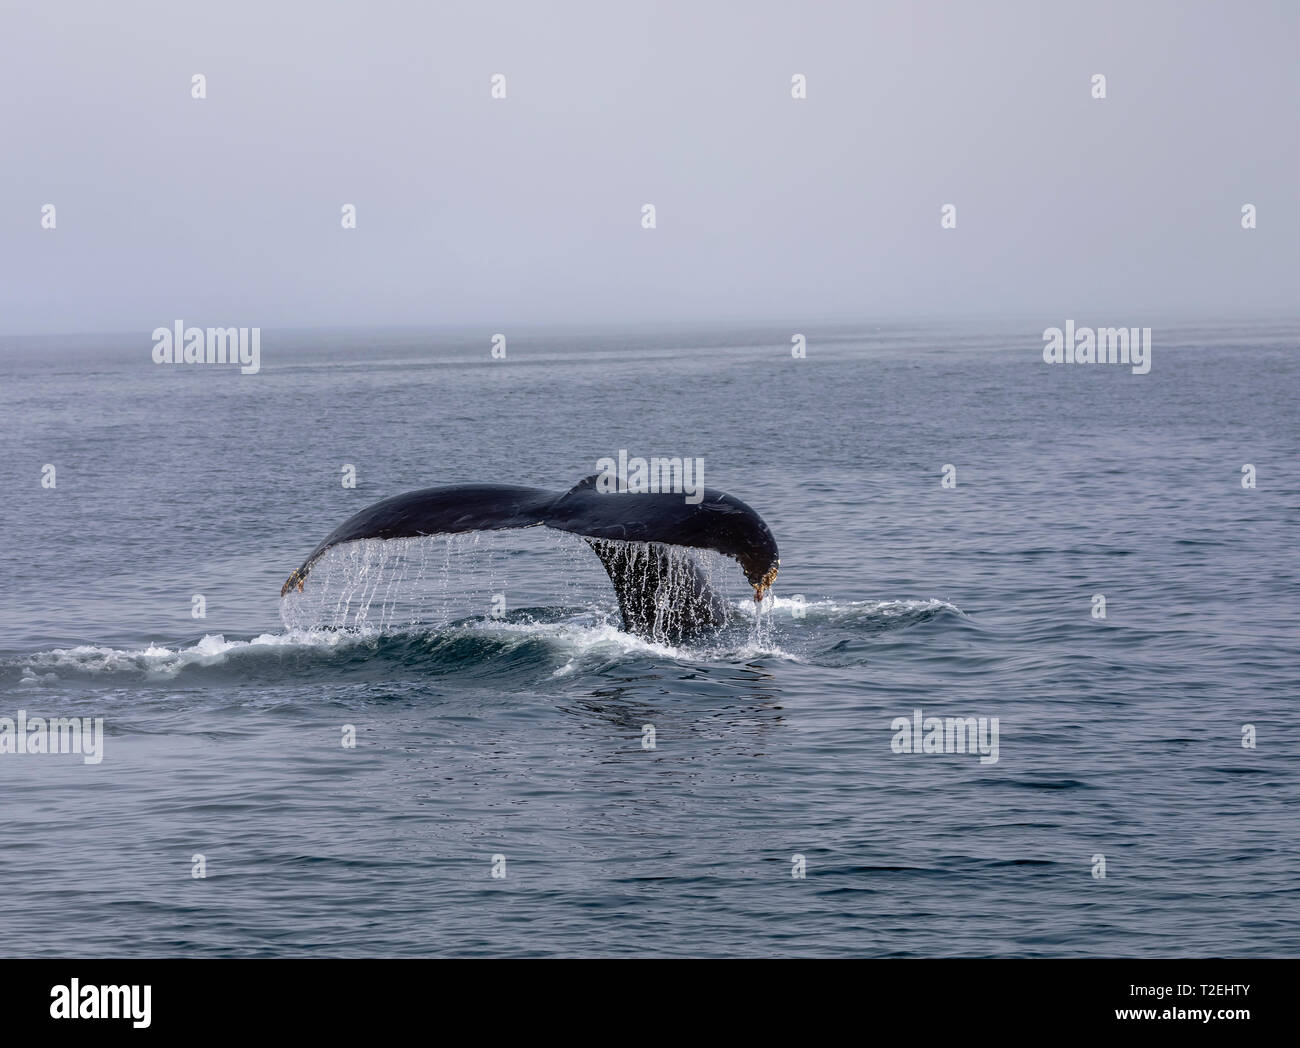 Humpback Whale (Megaptera novaeangliae) showing its tail while diving in Icy Strait, Inside Passage, Alaska Stock Photo